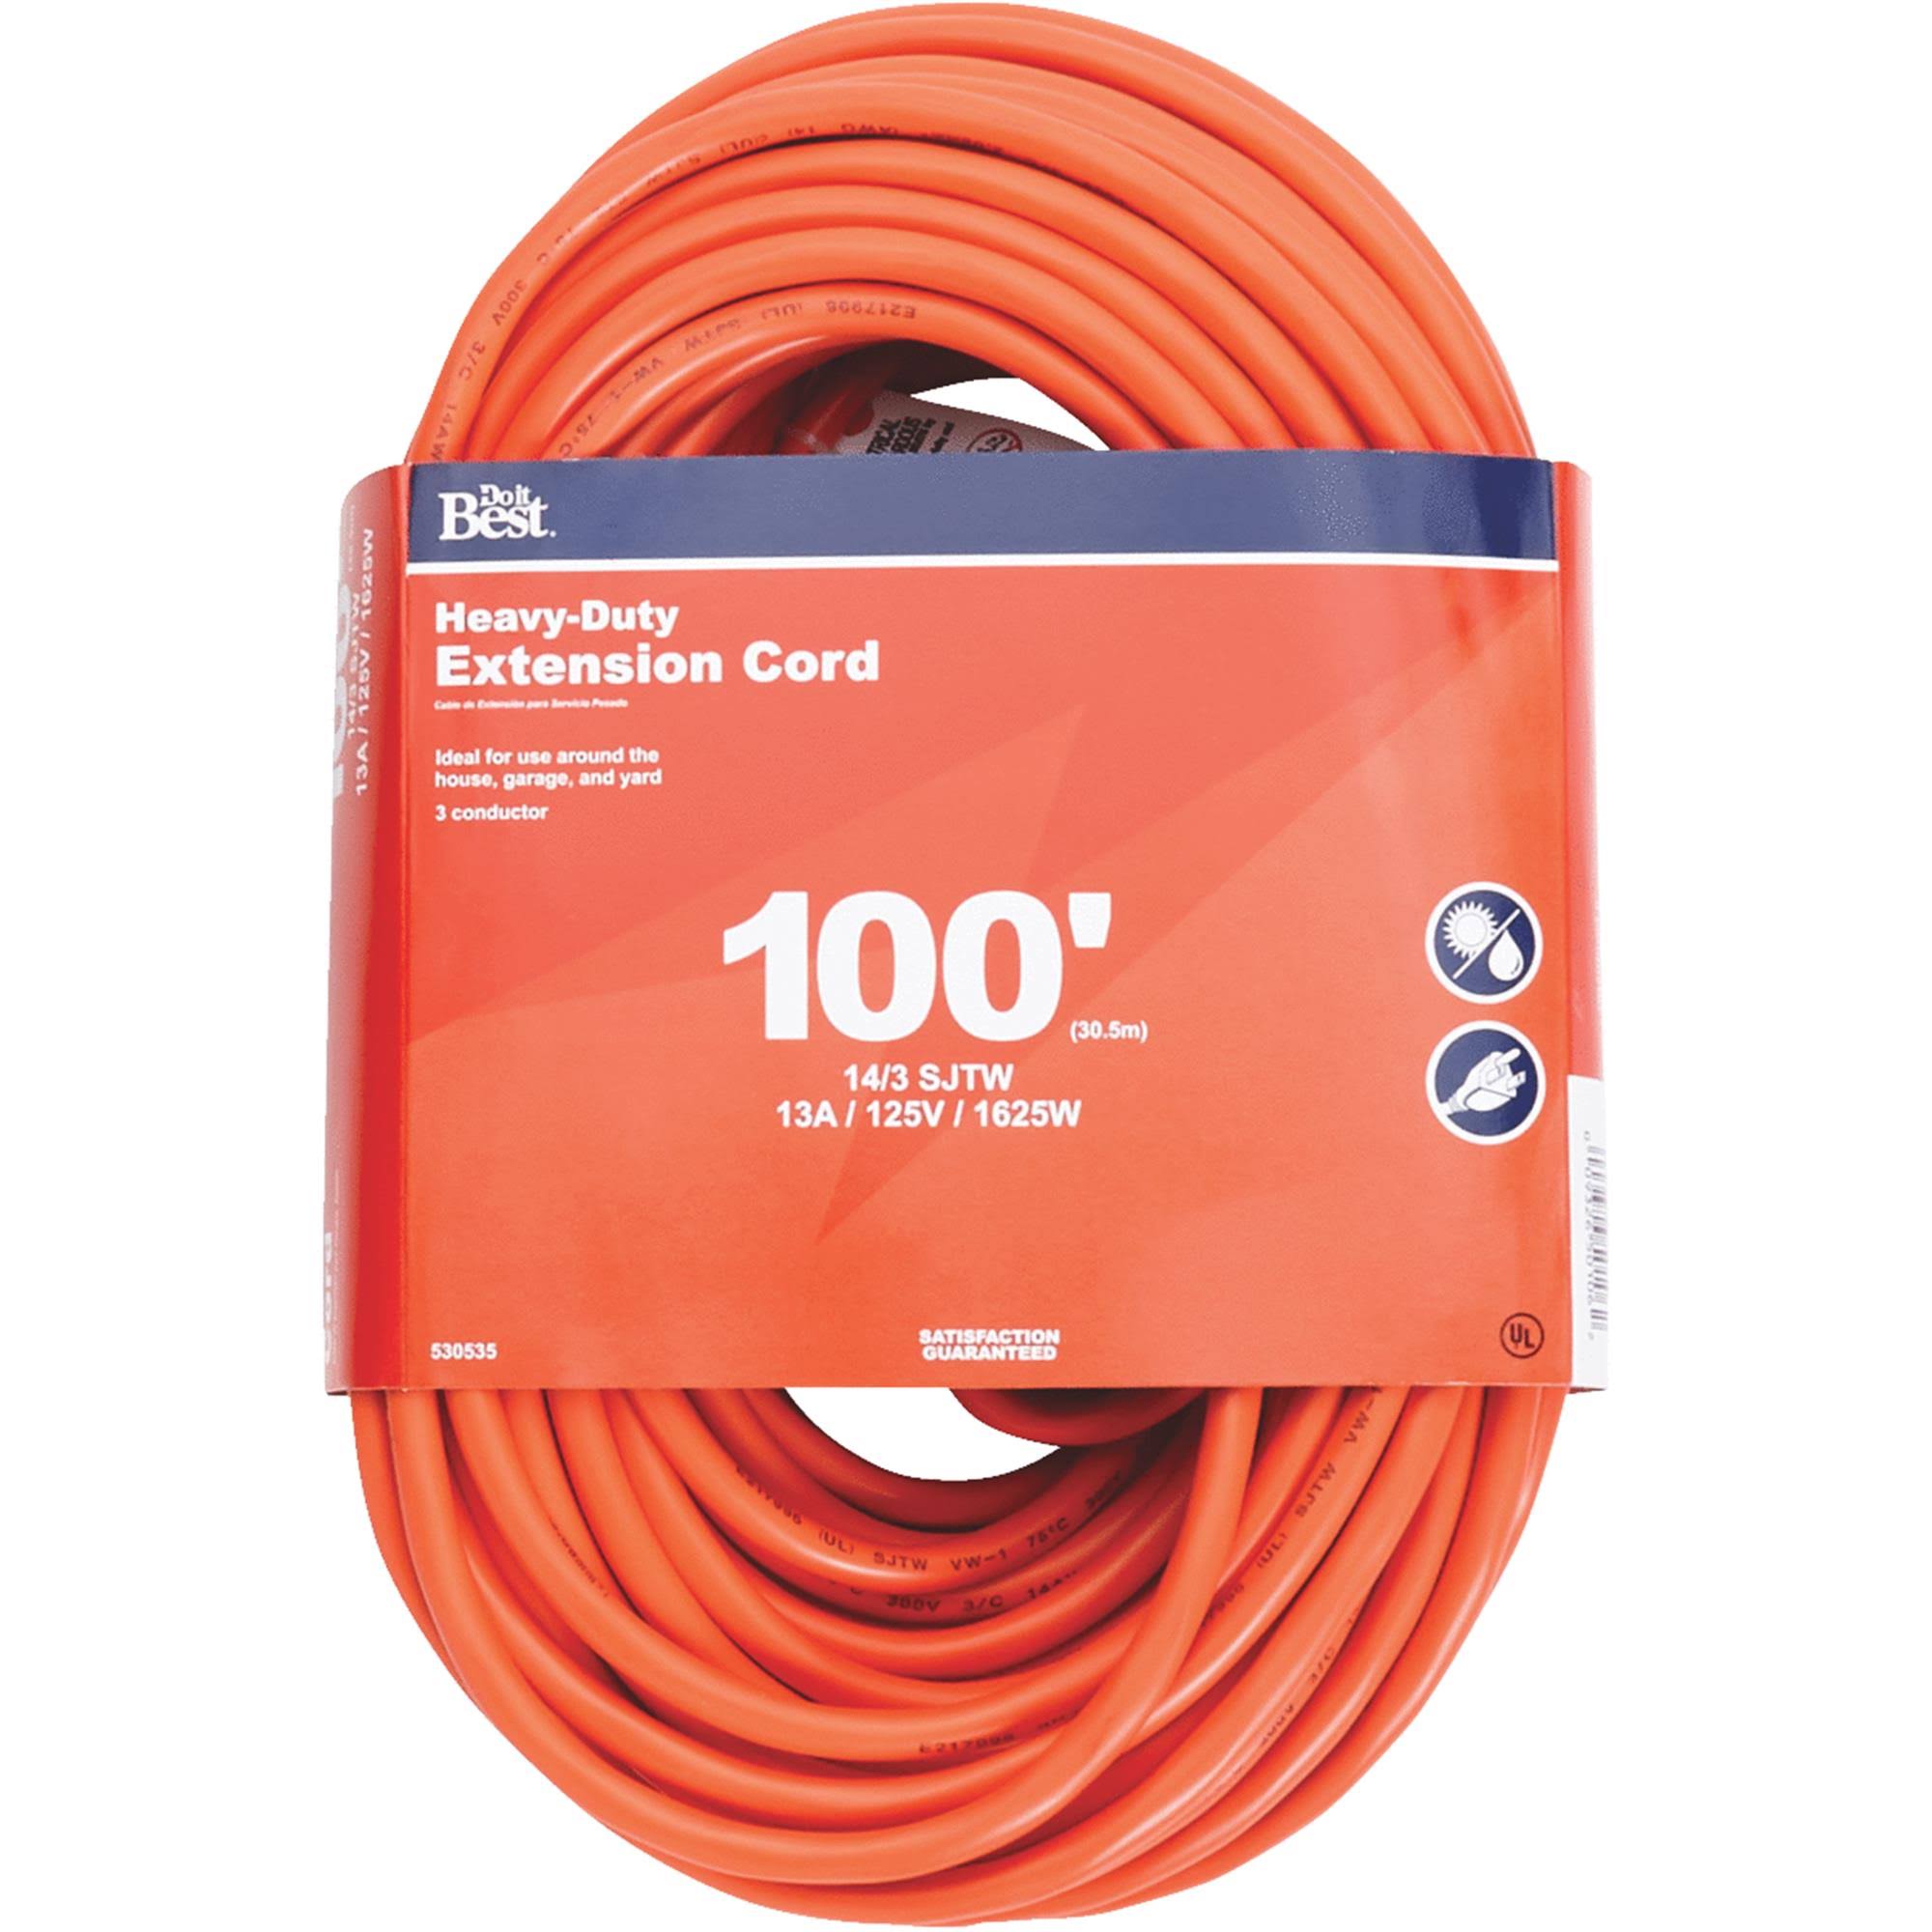 Do It Heavy-Duty Outdoor Extension Cord - 100'